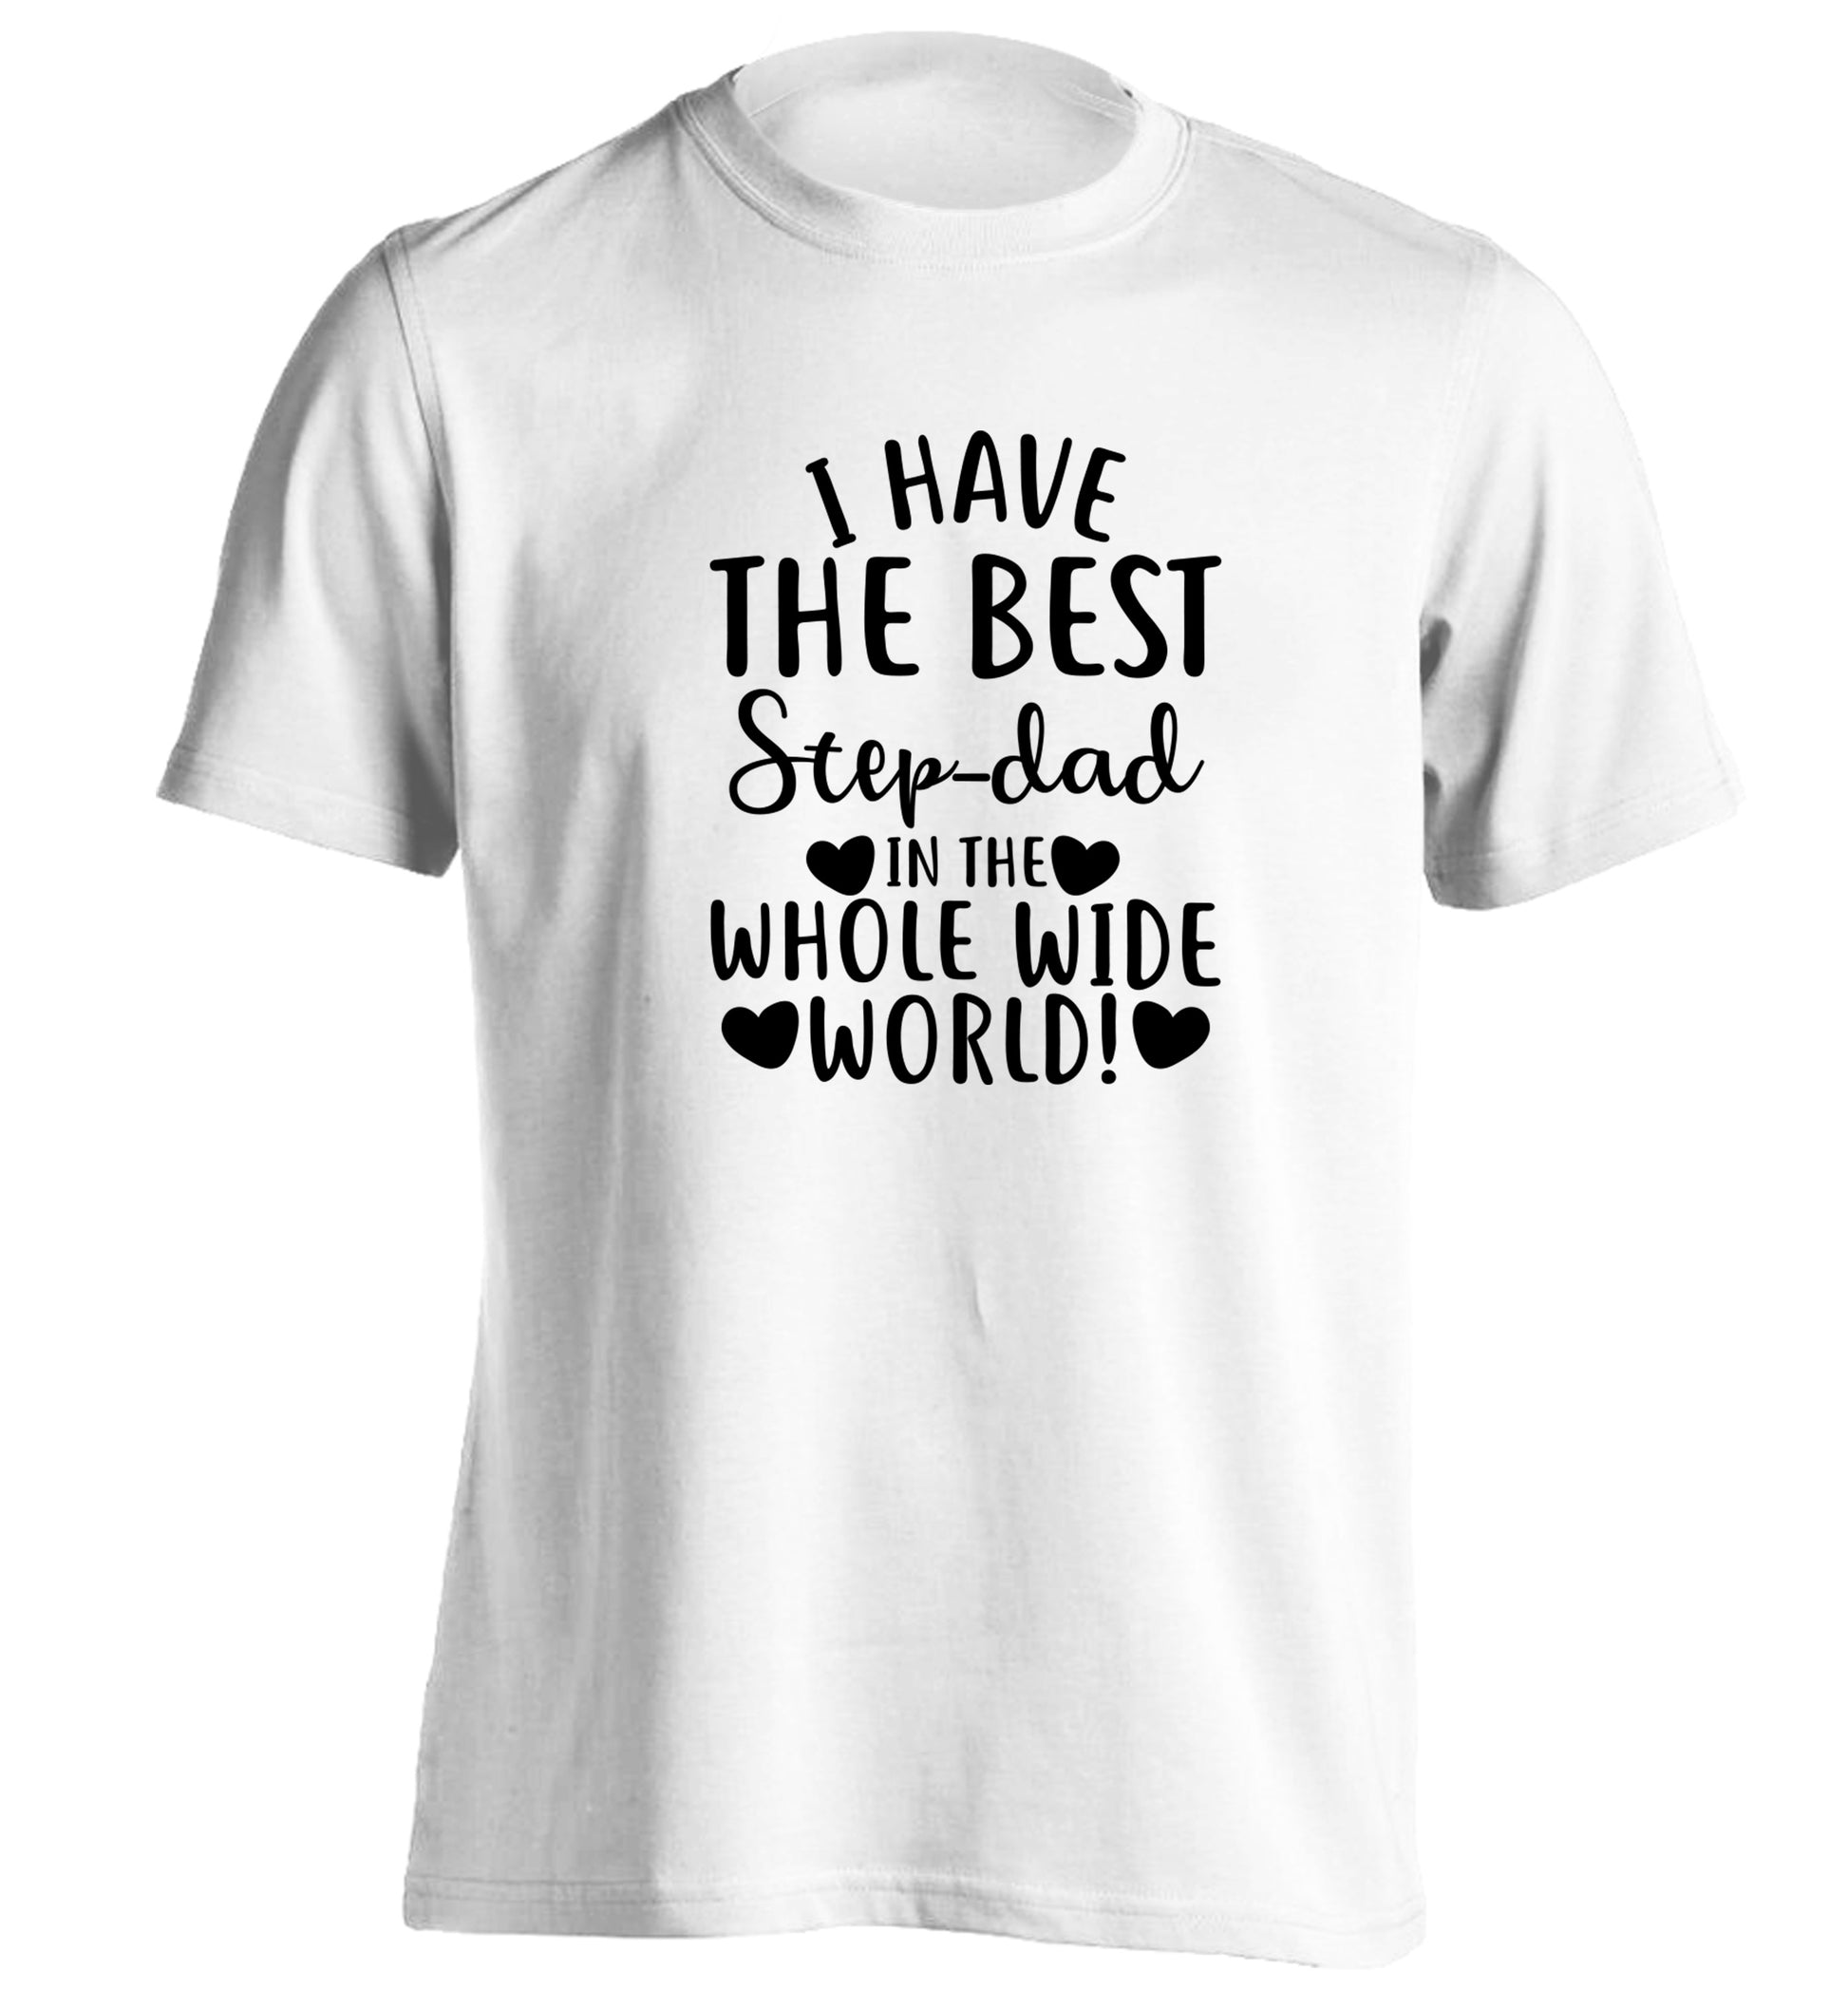 I have the best step-dad in the whole wide world! adults unisex white Tshirt 2XL